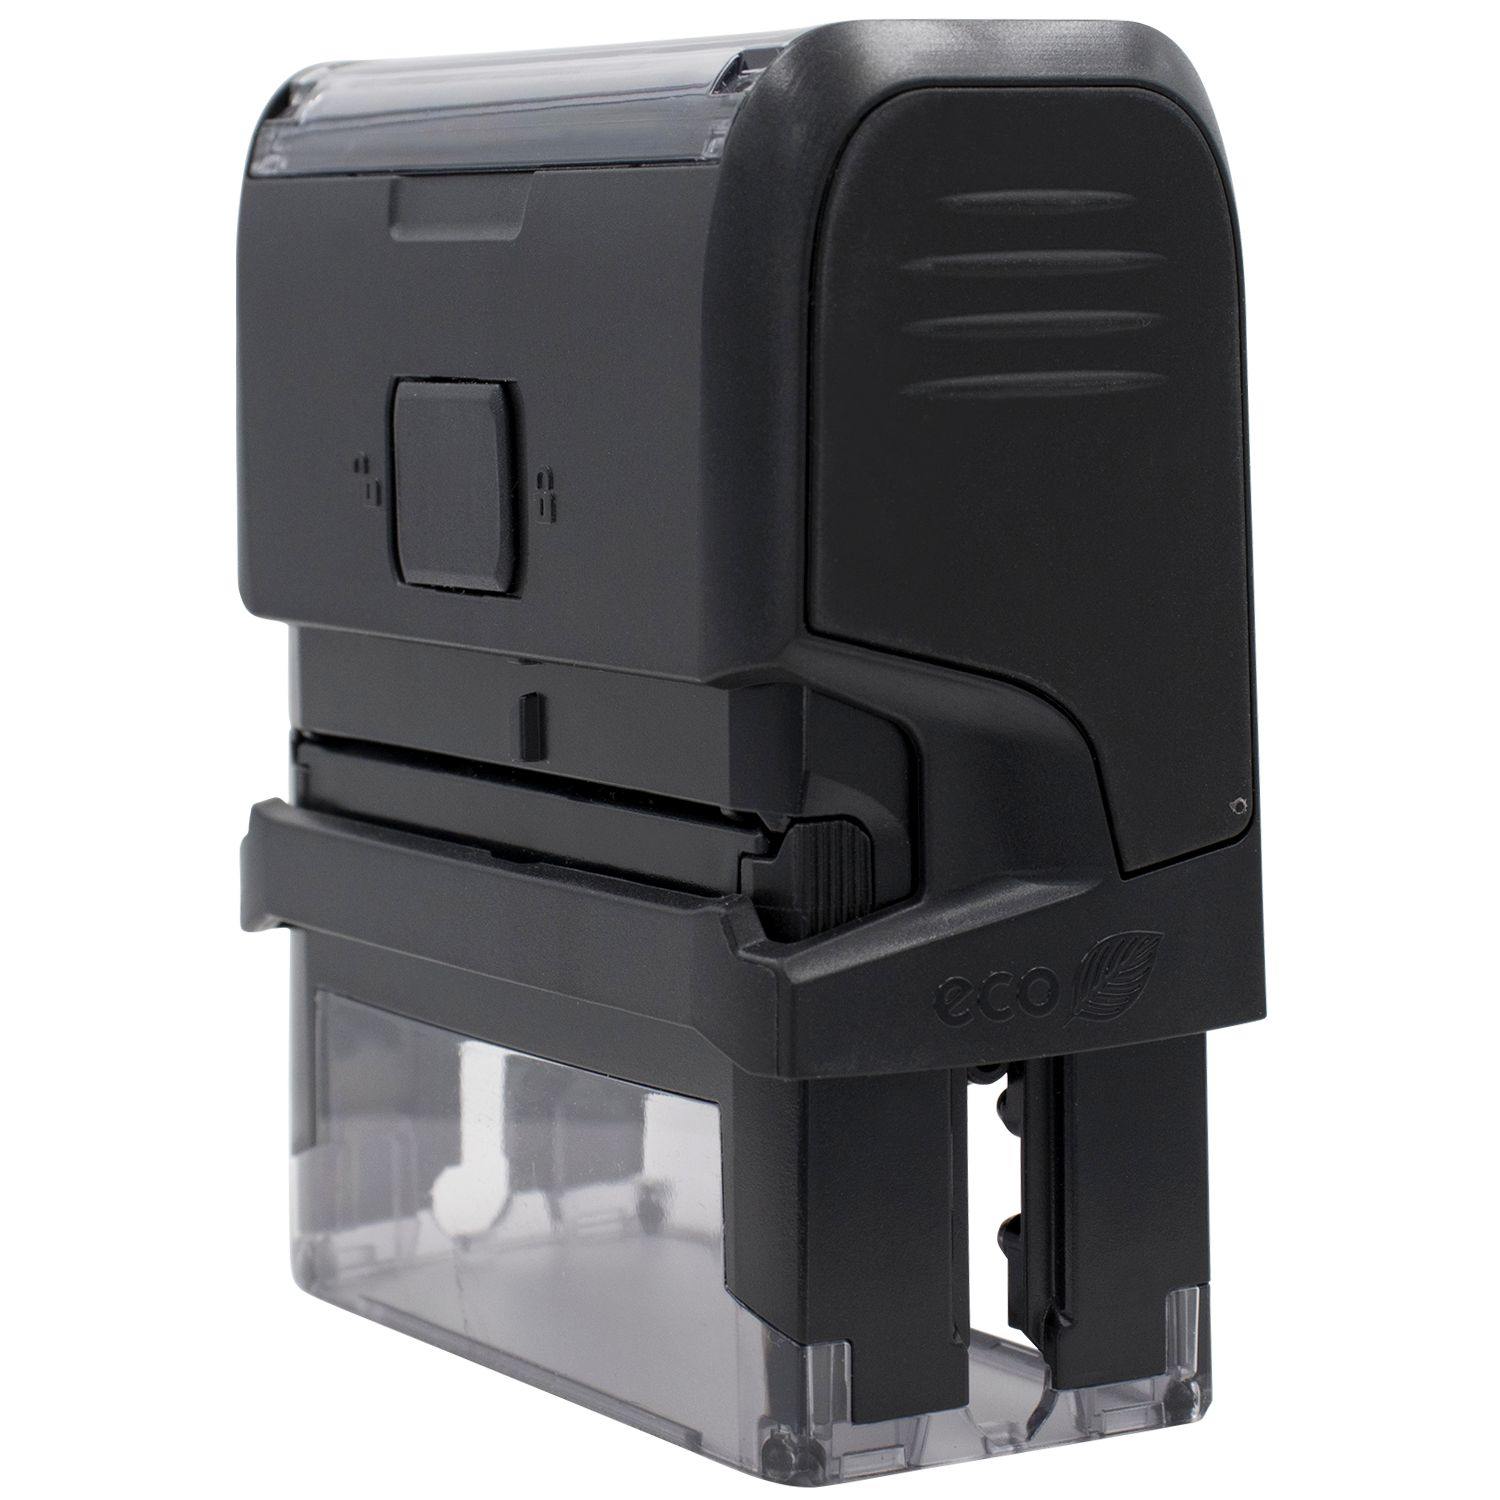 Self Inking WOW Stamp - Engineer Seal Stamps - Brand_Trodat, Impression Size_Small, Stamp Type_Self-Inking Stamp, Type of Use_Teacher